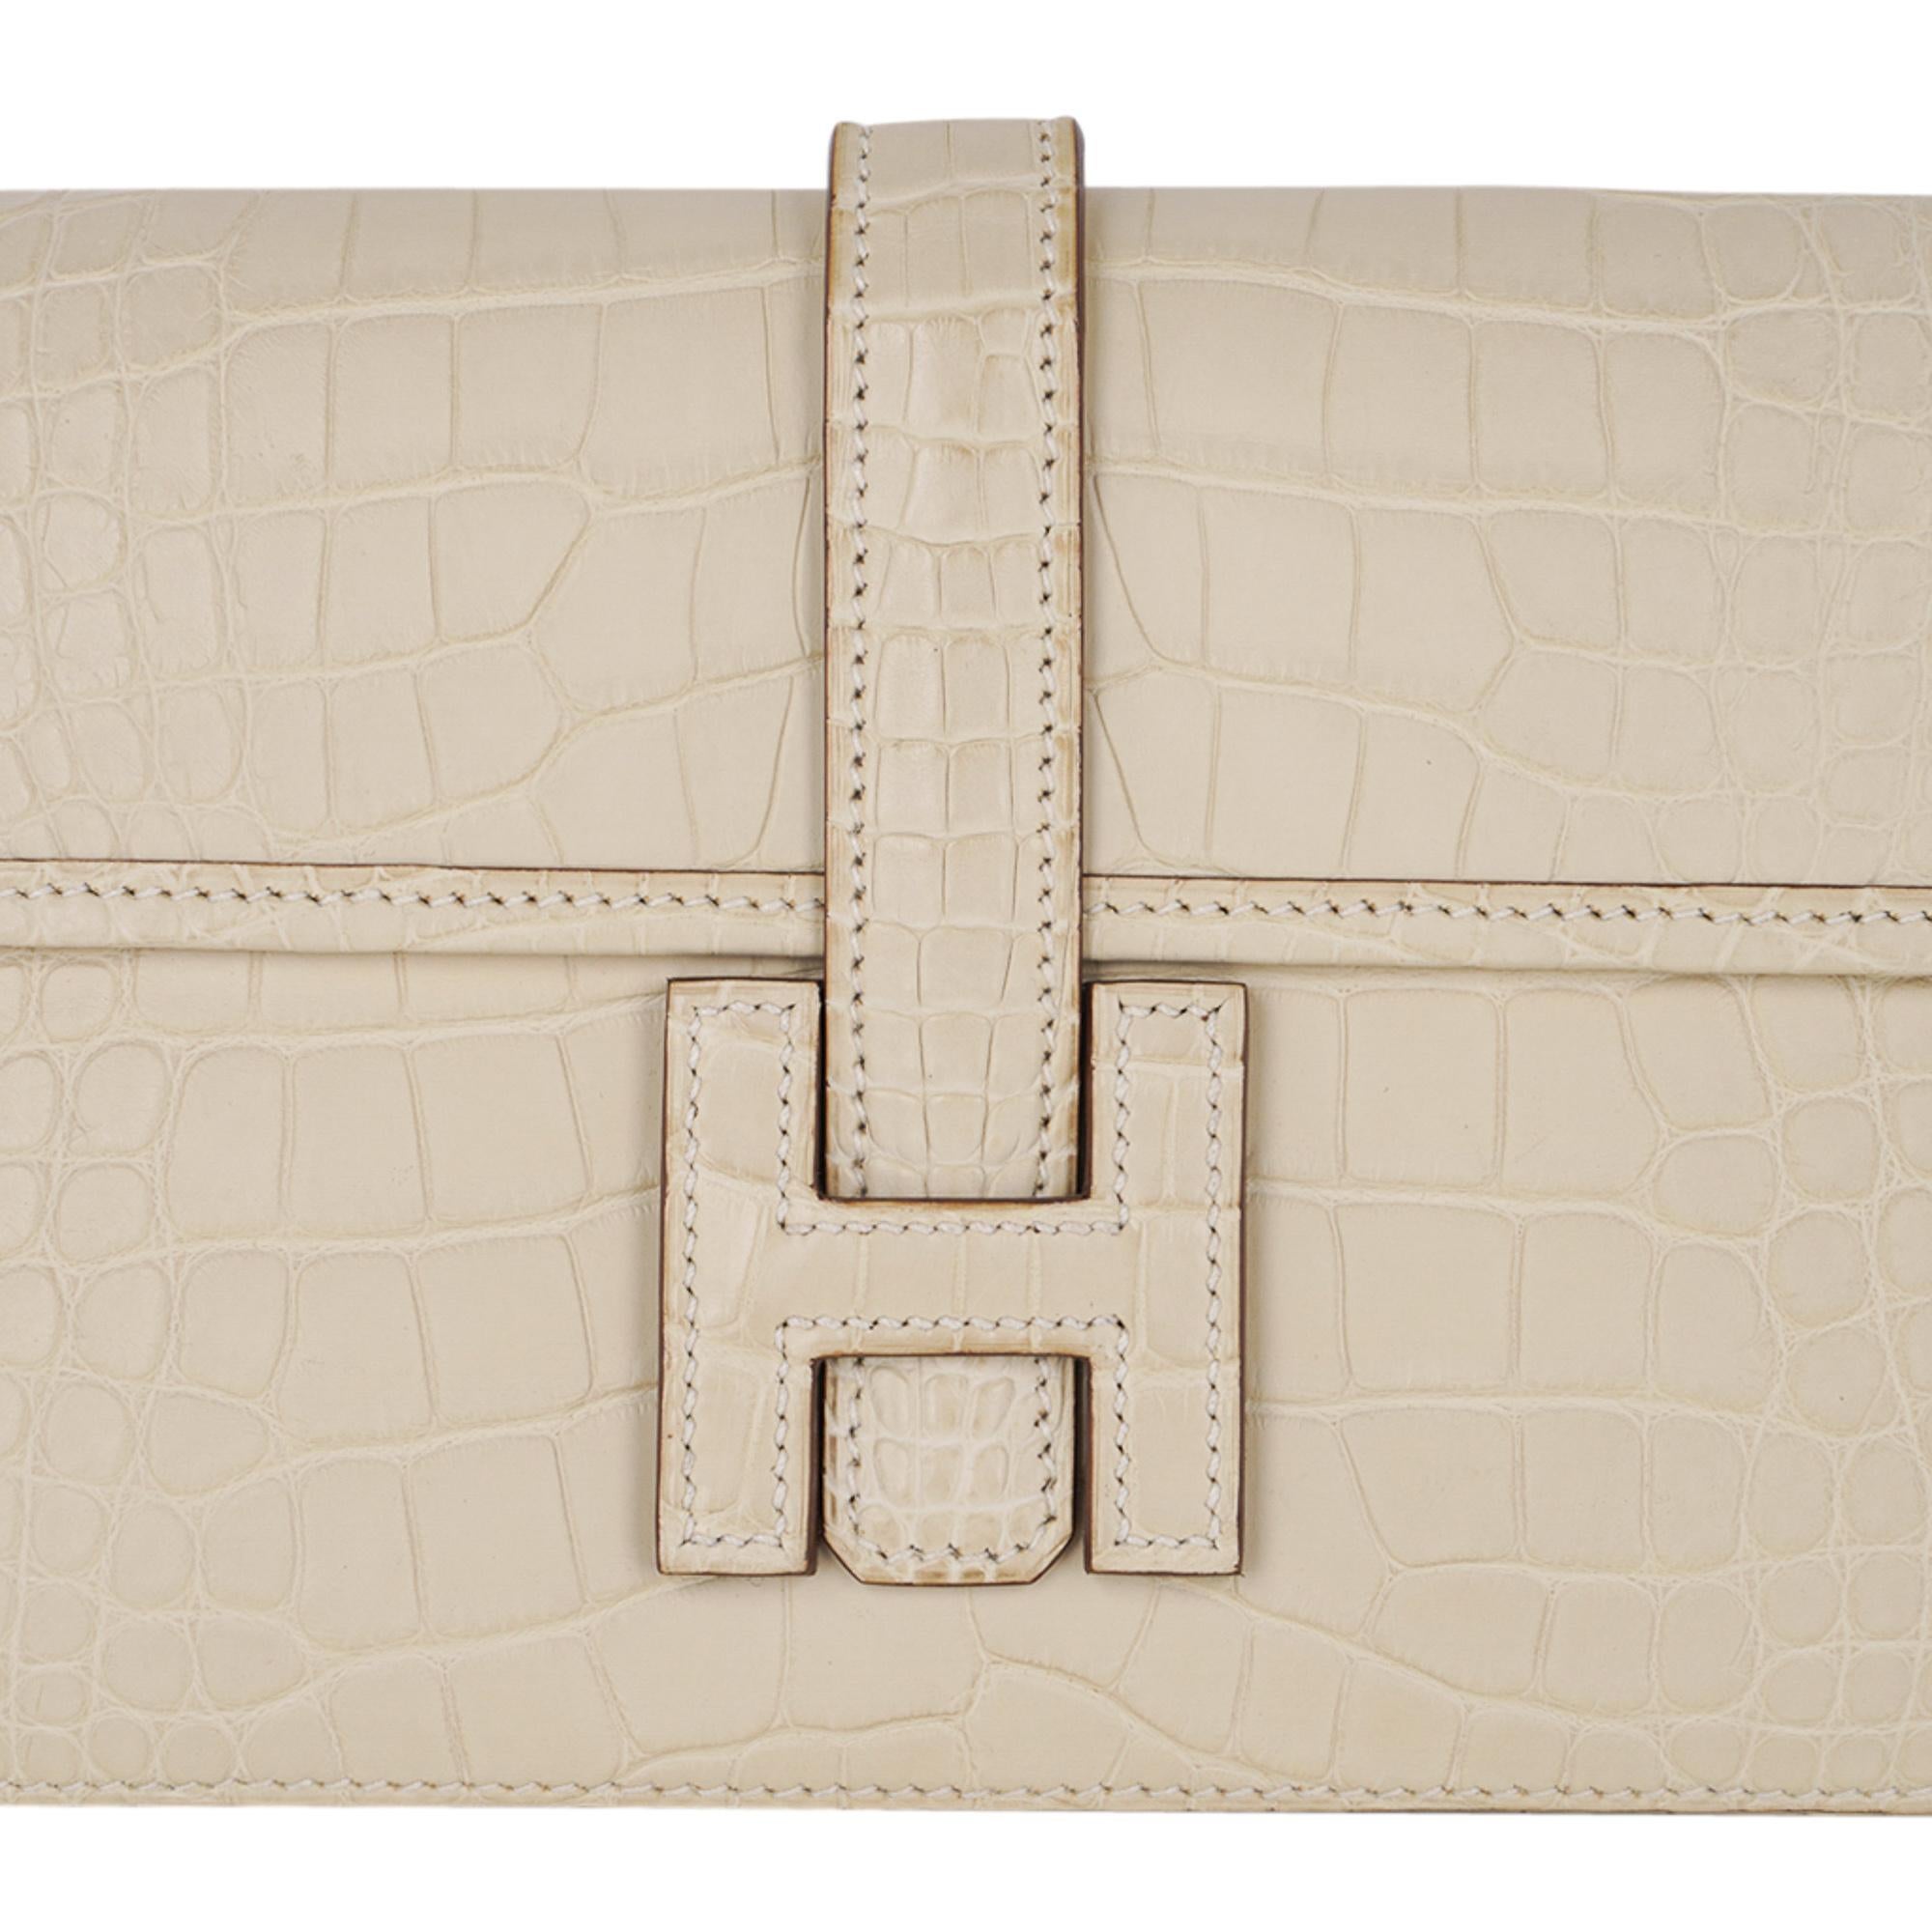 Mightychic offers a guaranteed authentic  Hermes Jige Duo Wallet featured in neutral perfection Vanille Matte Alligator. 
This stunning Hermes Duo wallet also doubles as a clutch.
Signature H with strap for closure.
Two interior slot pockets.